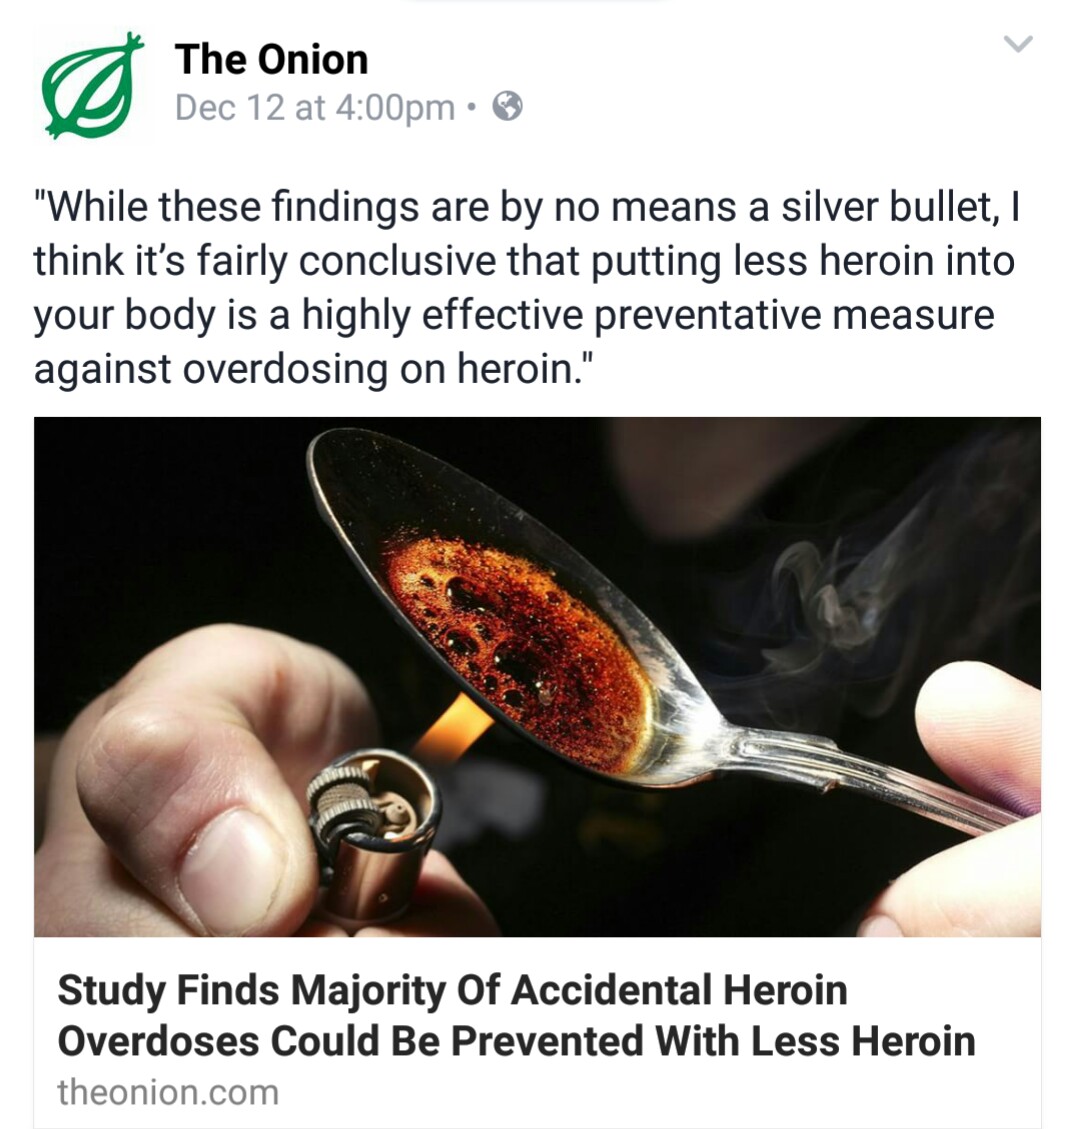 heroin drug use - The Onion Dec 12 at pm "While these findings are by no means a silver bullet, I think it's fairly conclusive that putting less heroin into your body is a highly effective preventative measure against overdosing on heroin." Study Finds Ma